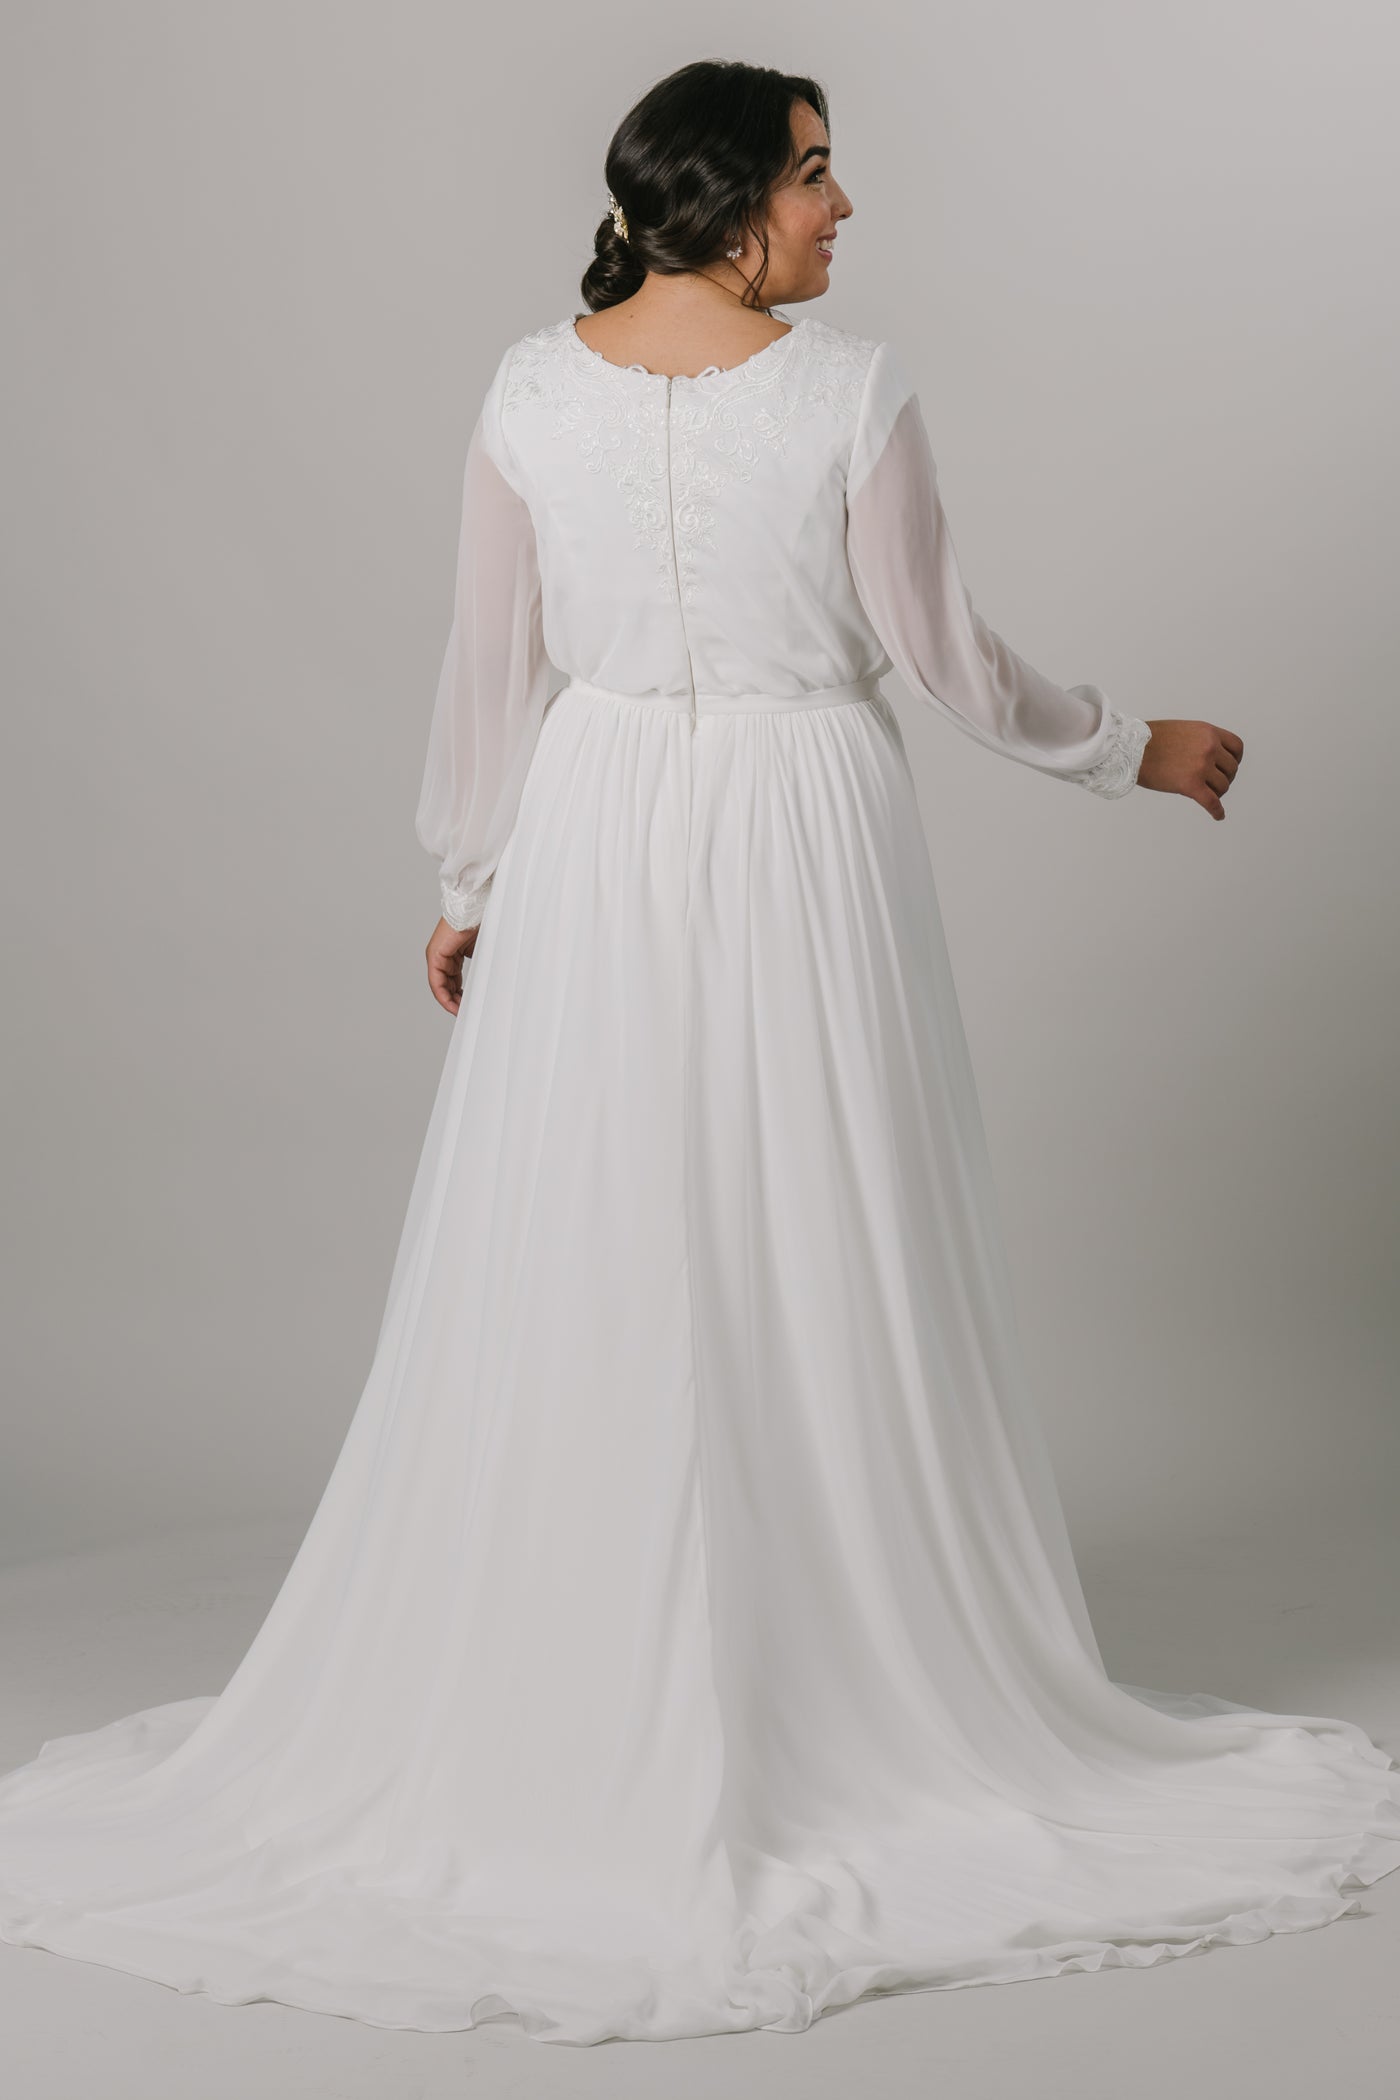 The back of a plus size version long-sleeve modest wedding dress features a v-neckline, bishop sleeves, and an a-line fit that flatters every figure.   Style Love: Gorgeous shimmering lace around the neckline and sleeve cuffs!